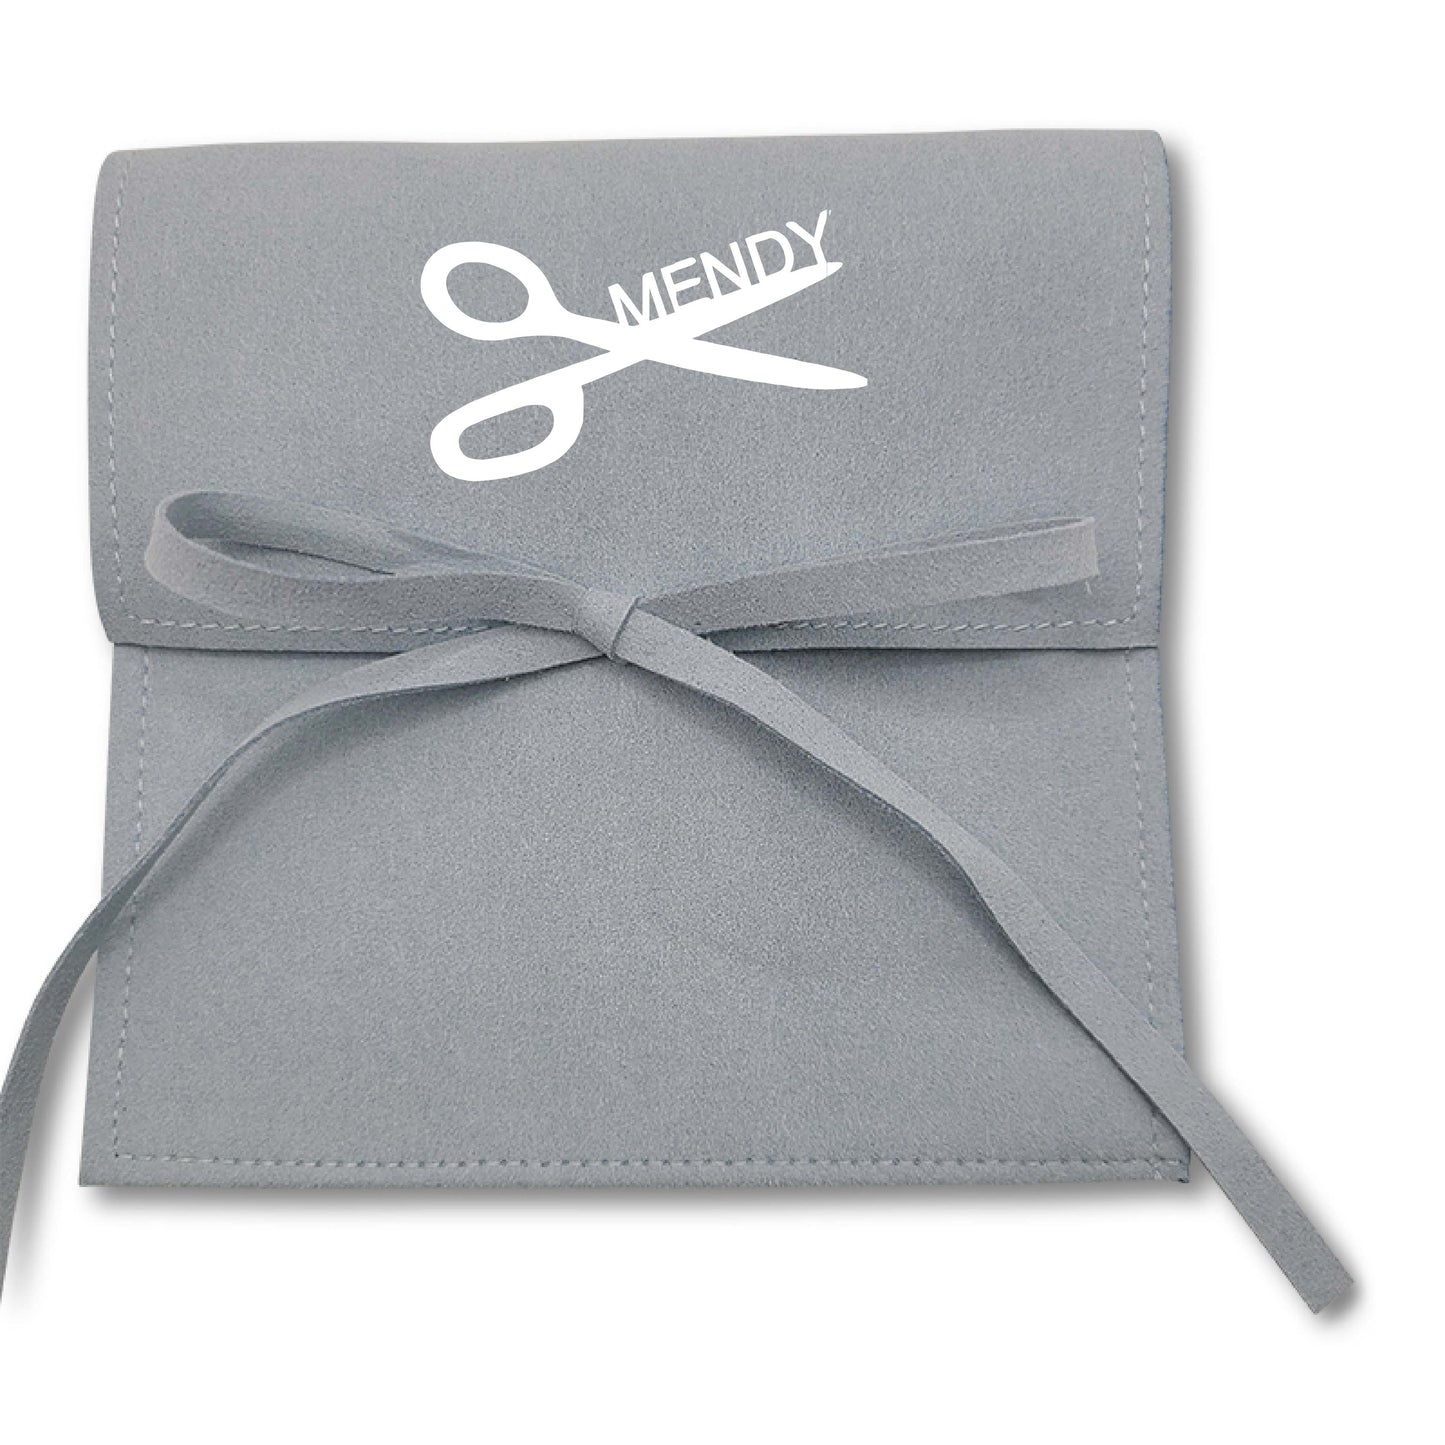 Microfiber Upsherin Pouch in light blue with Scissors Design, More colors available.